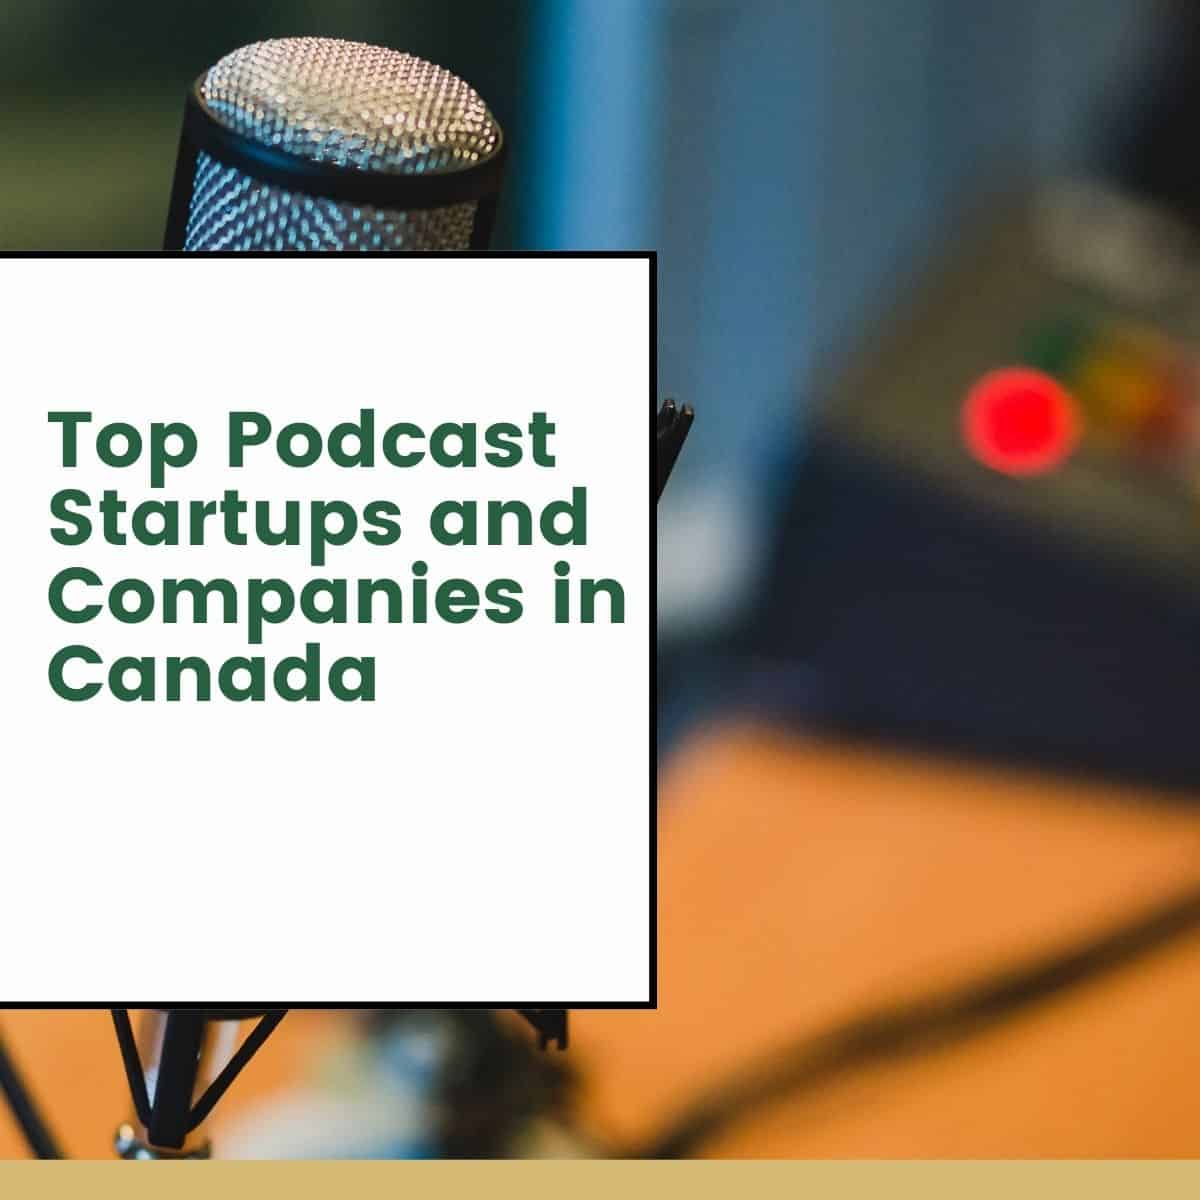 Top Podcast Startups and Companies in Canada